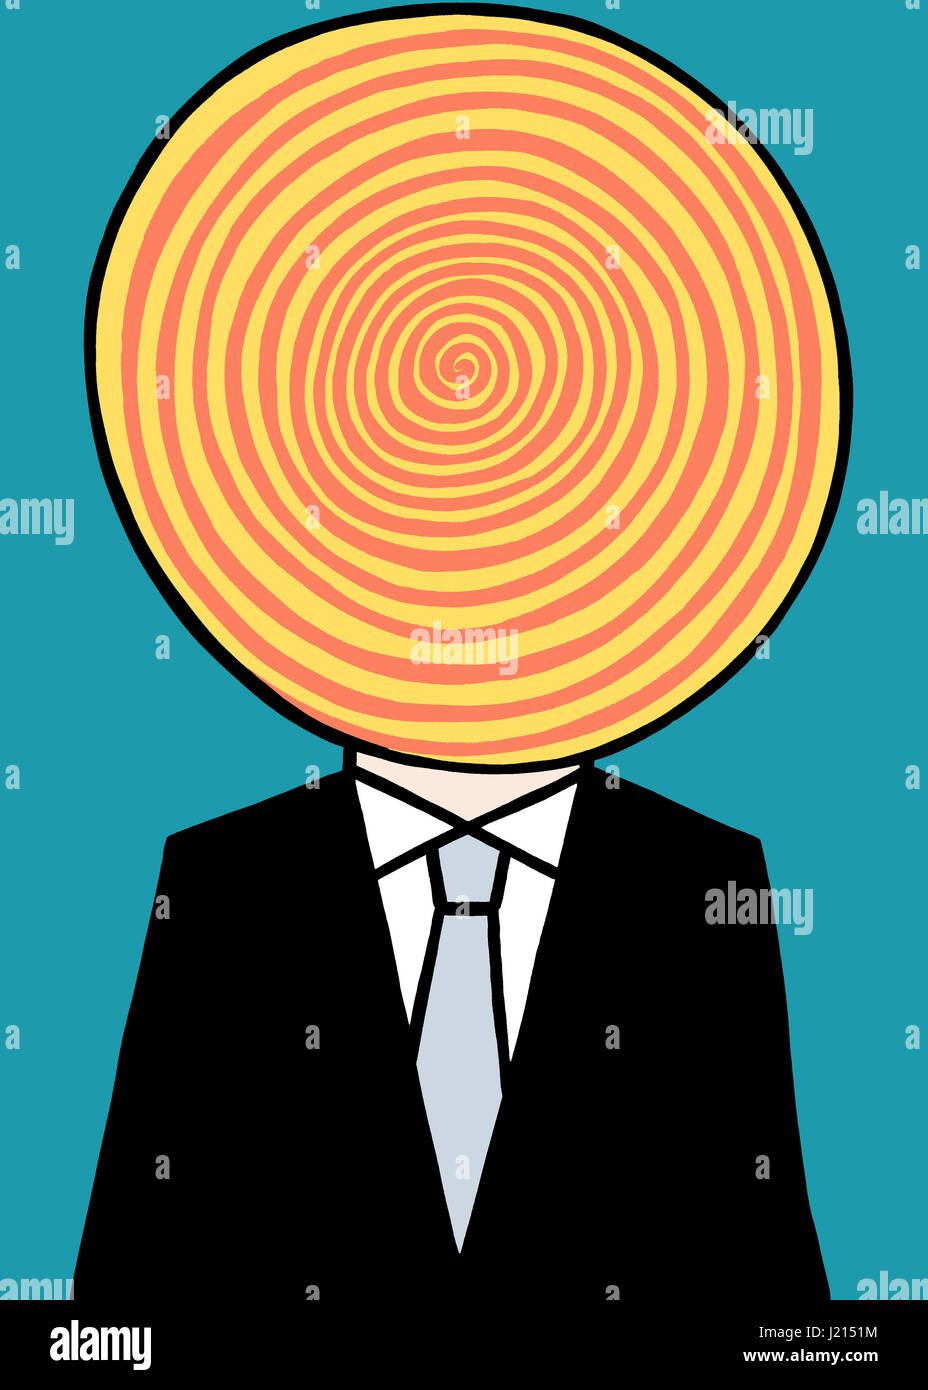 Look into my spinning mind. A business illustration about thinking different thoughts. Stock Photo